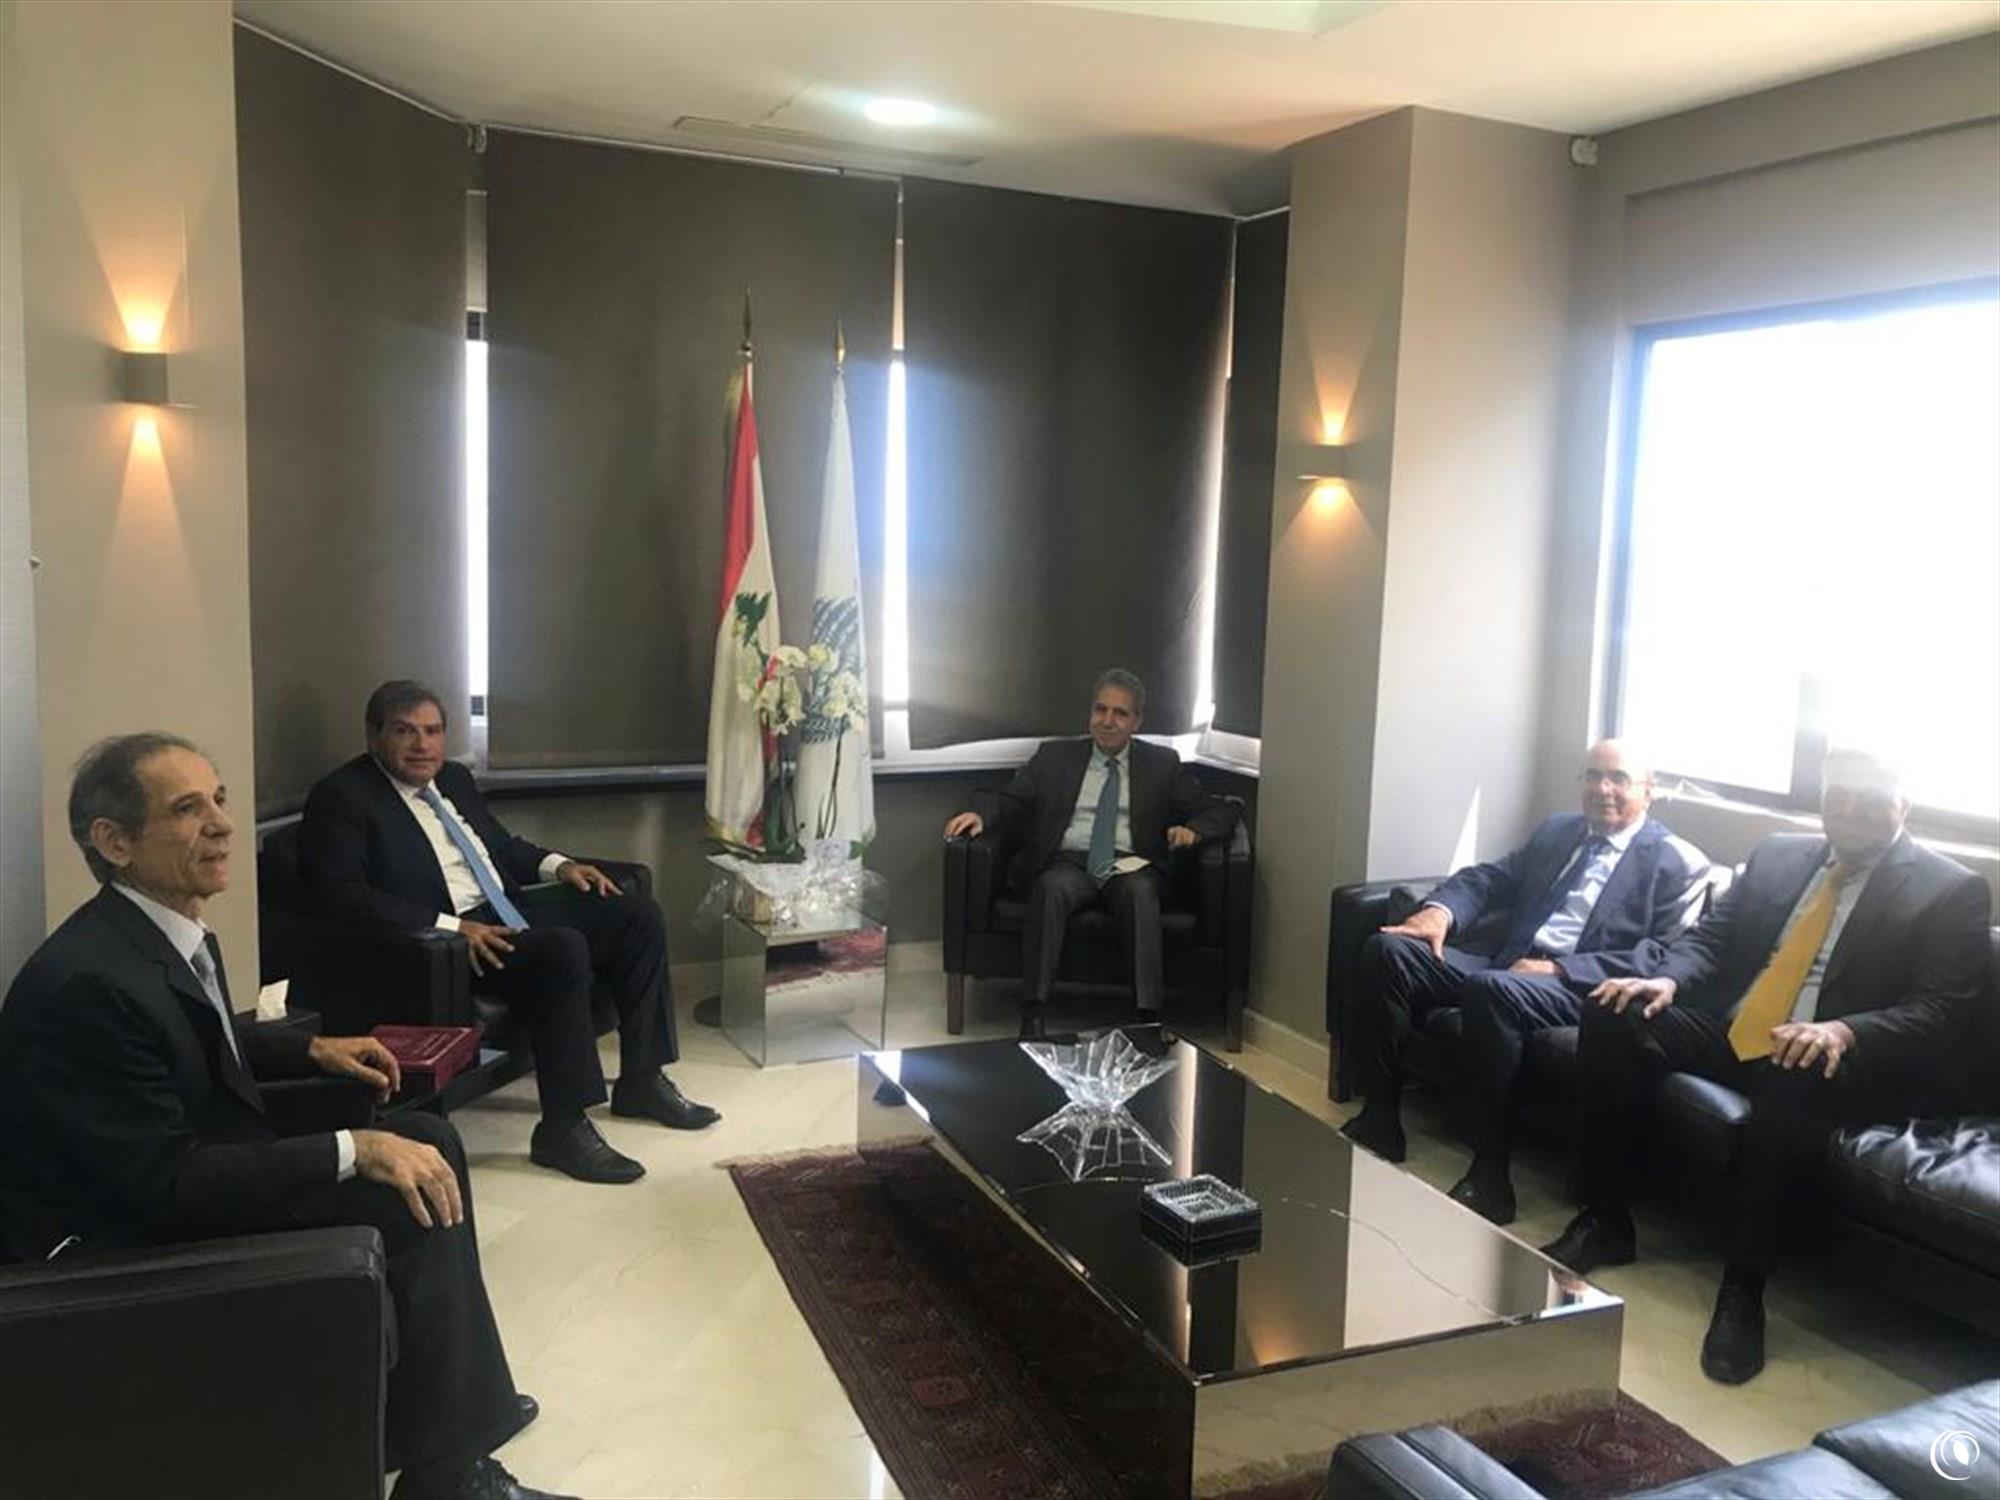 Seklaoui after meeting Finance Minister: We overcame the obstacles and achieved positive results